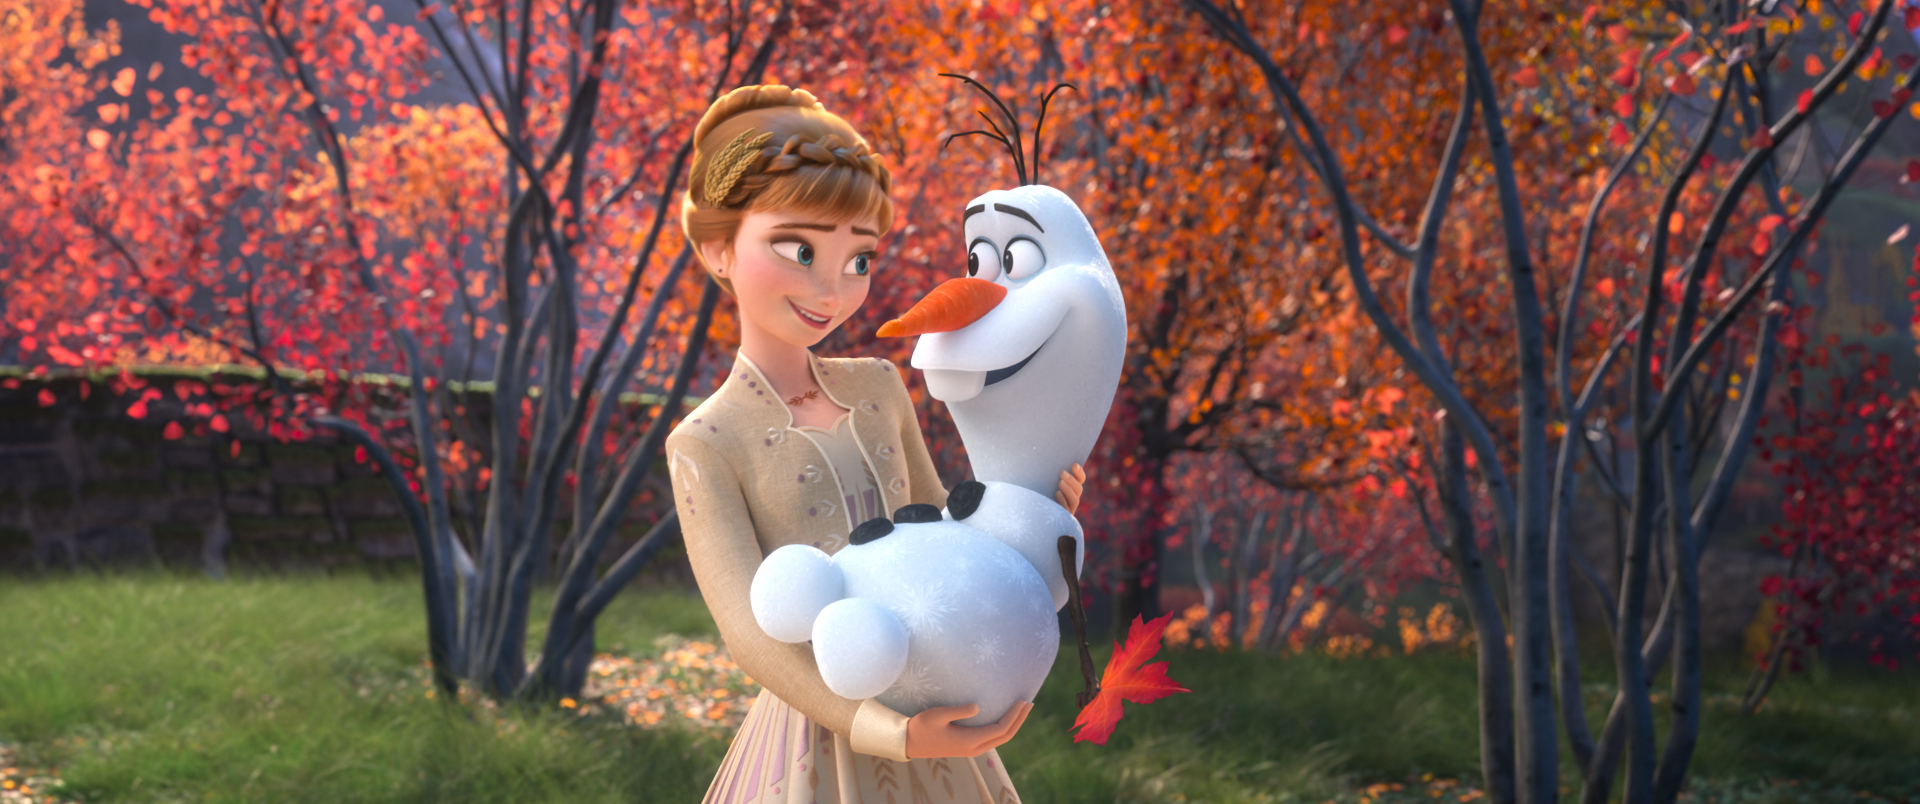 SOME THINGS NEVER CHANGE – In “Frozen 2,” Anna’s positive spirit is reflected in a song she begins in an effort to assuage Olaf’s uncertainty about the ever-evolving world around him. The song, “Some Things Never Change,”—which features Anna, Olaf, Elsa and Kristoff —introduces the idea of change to the story, and despite its title, it’s also a promise that change is on the horizon. Featuring the voices of Kristen Bell, Josh Gad, Idina Menzel and Jonathan Groff, Walt Disney Animation Studios’ “Frozen 2” opens in U.S. theaters on Nov. 22, 2019. © 2019 Disney. All Rights Reserved.